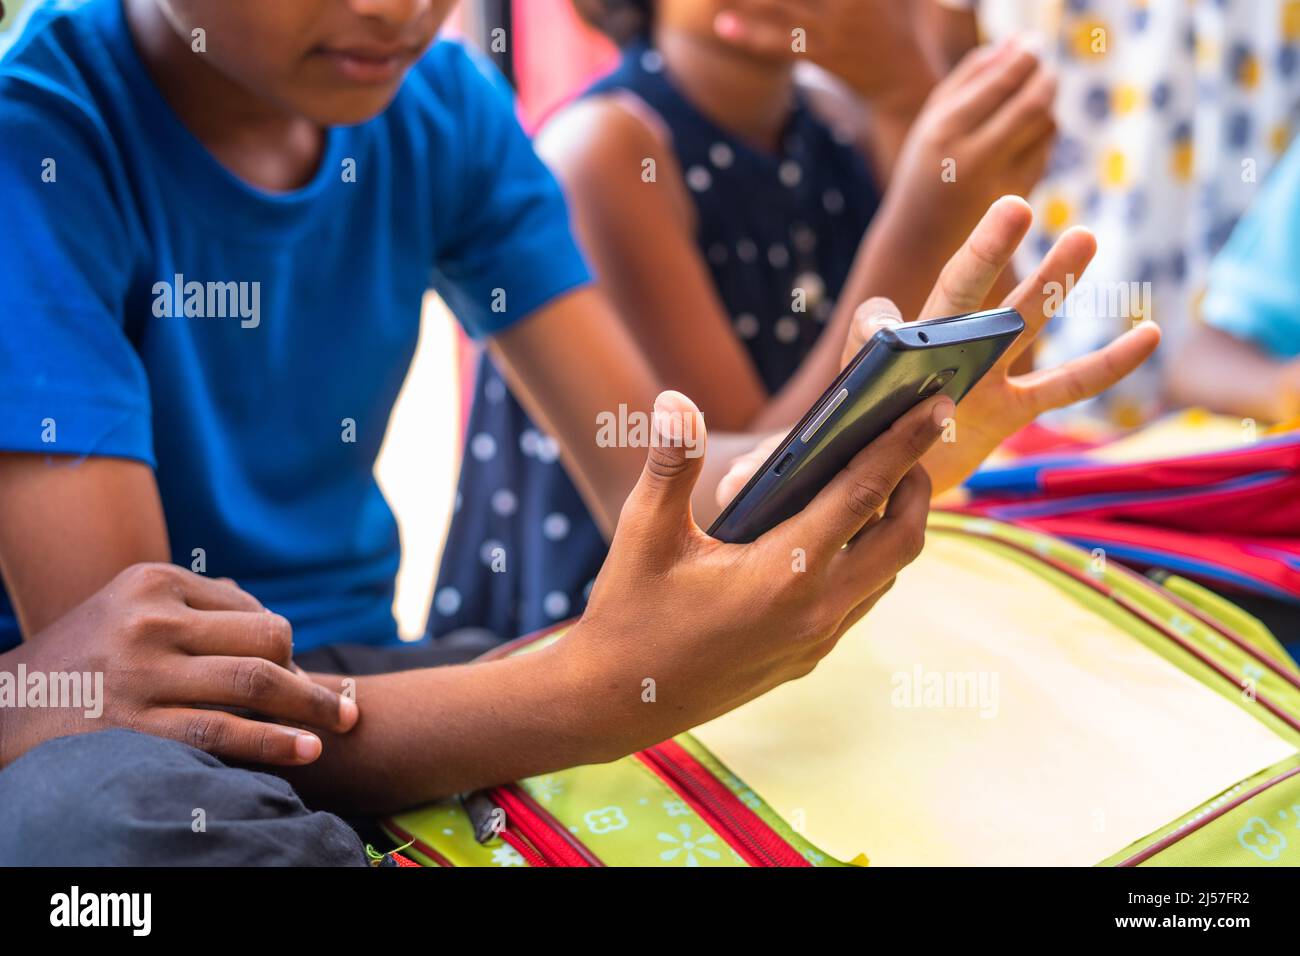 Close up of kids hands busy using mobile phone while sitting at school corridor during break - concept of technology, social media and smartphone Stock Photo